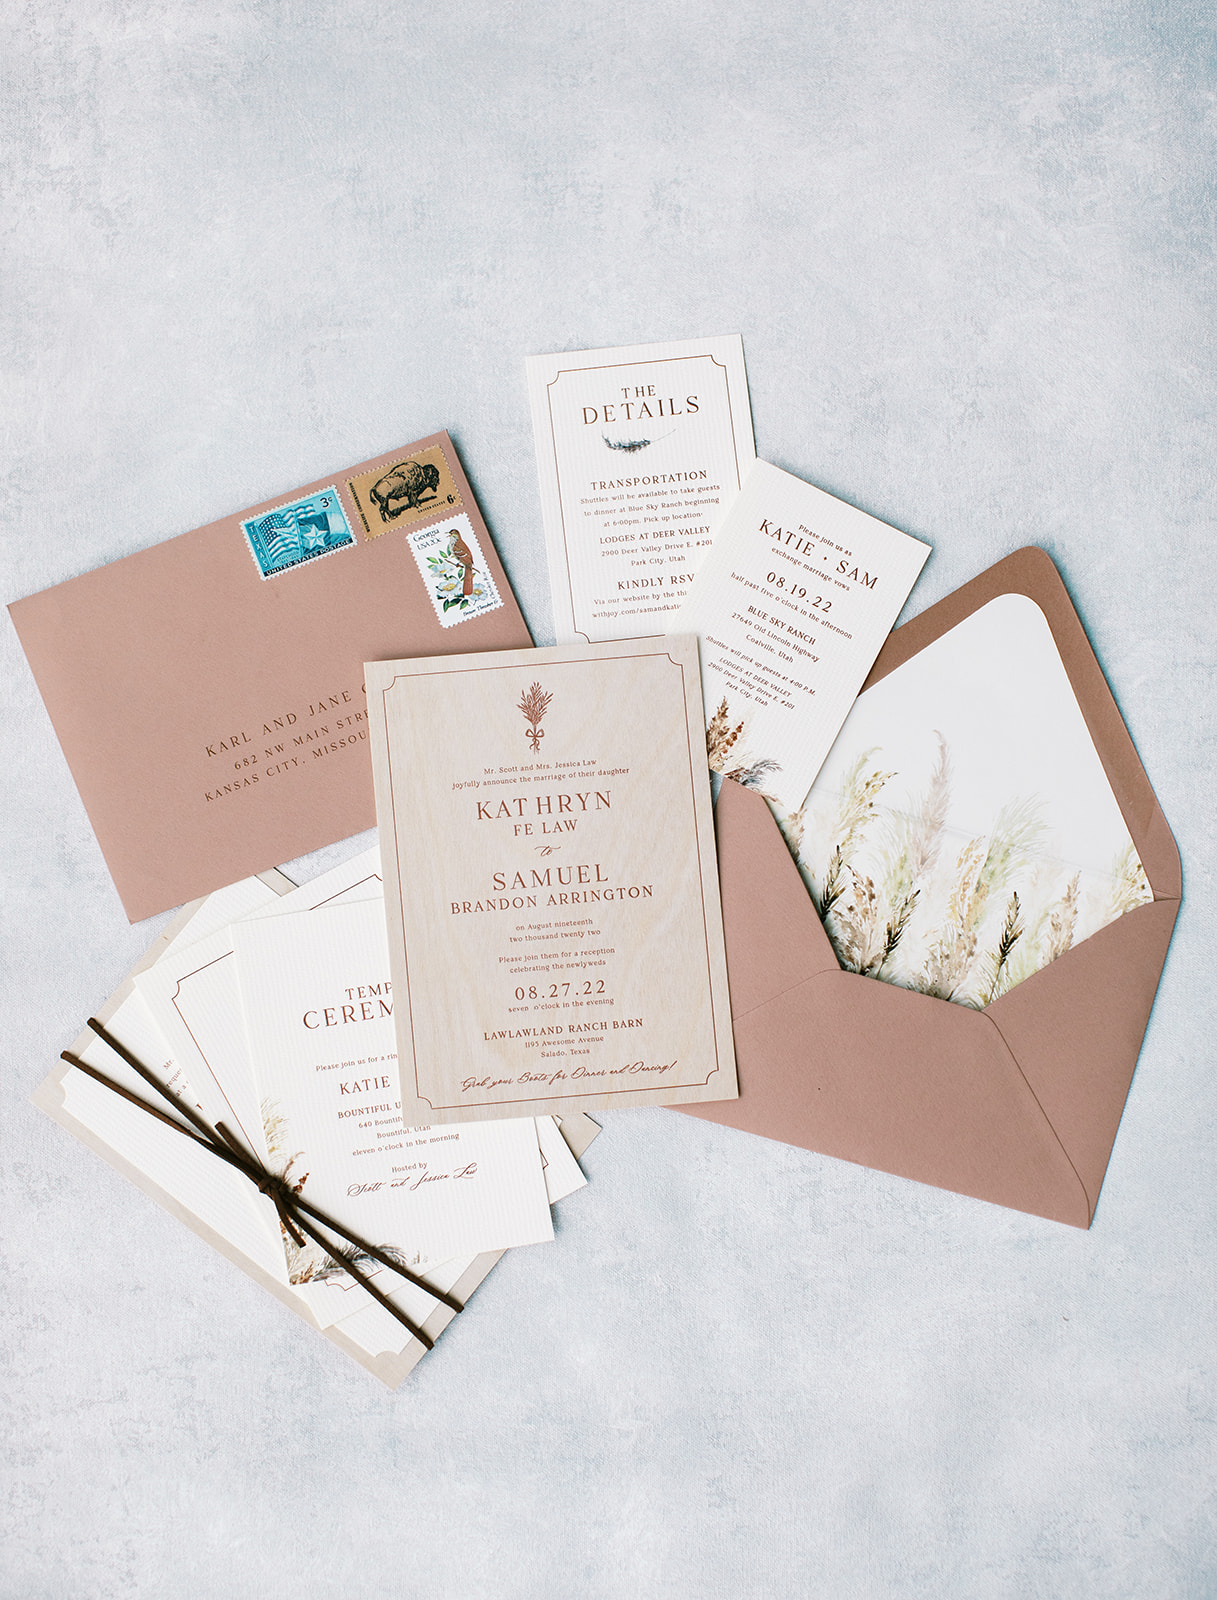 wedding invitaitions for a western wedding in park city utah
